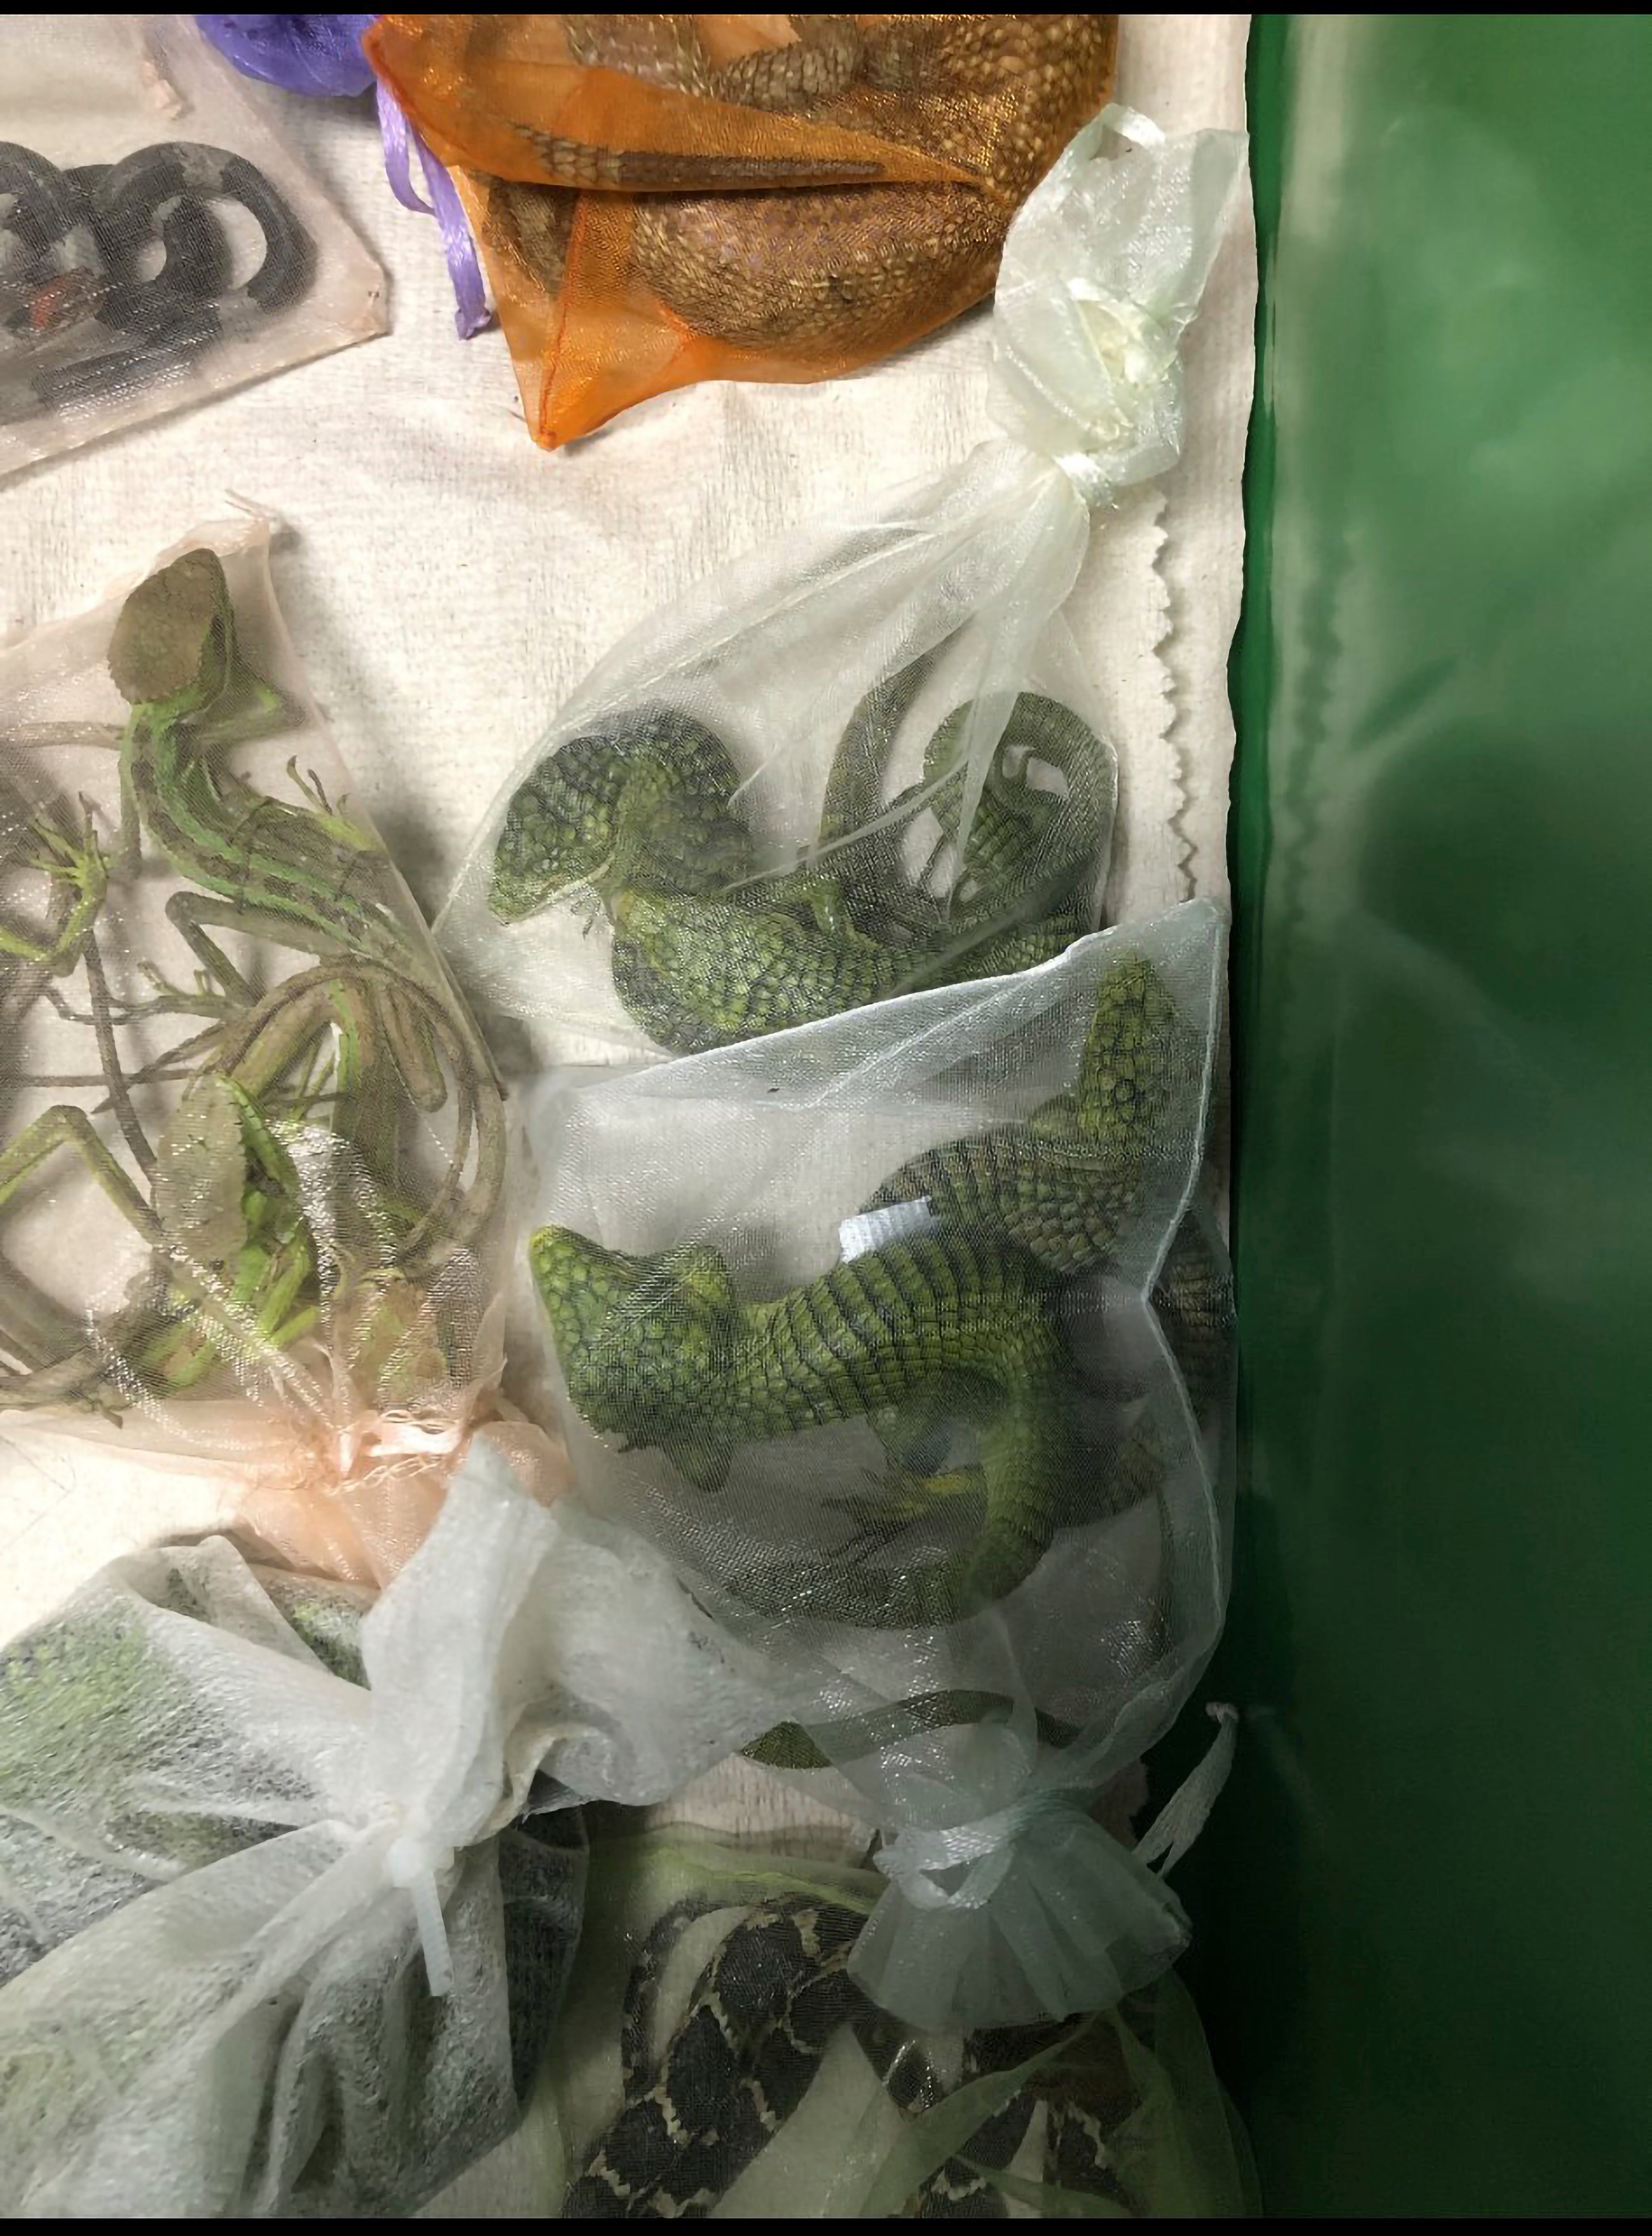 A photo from the US Attorney’s Office for the Central District of California showing animals smuggled into the US